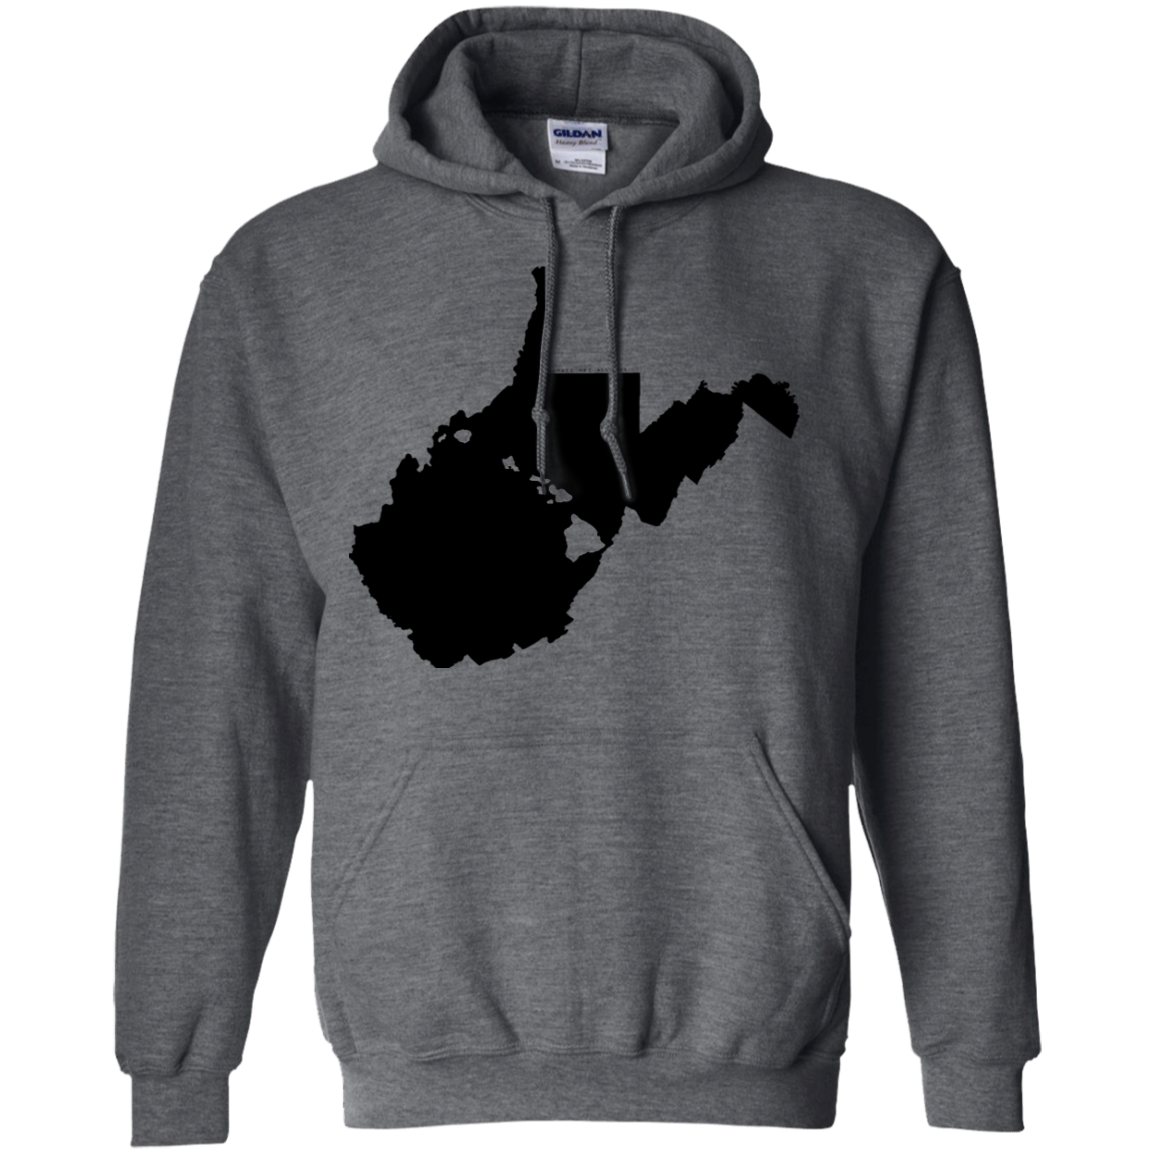 Living in West Virginia with Hawaii Roots Pullover Hoodie 8 oz., Sweatshirts, Hawaii Nei All Day